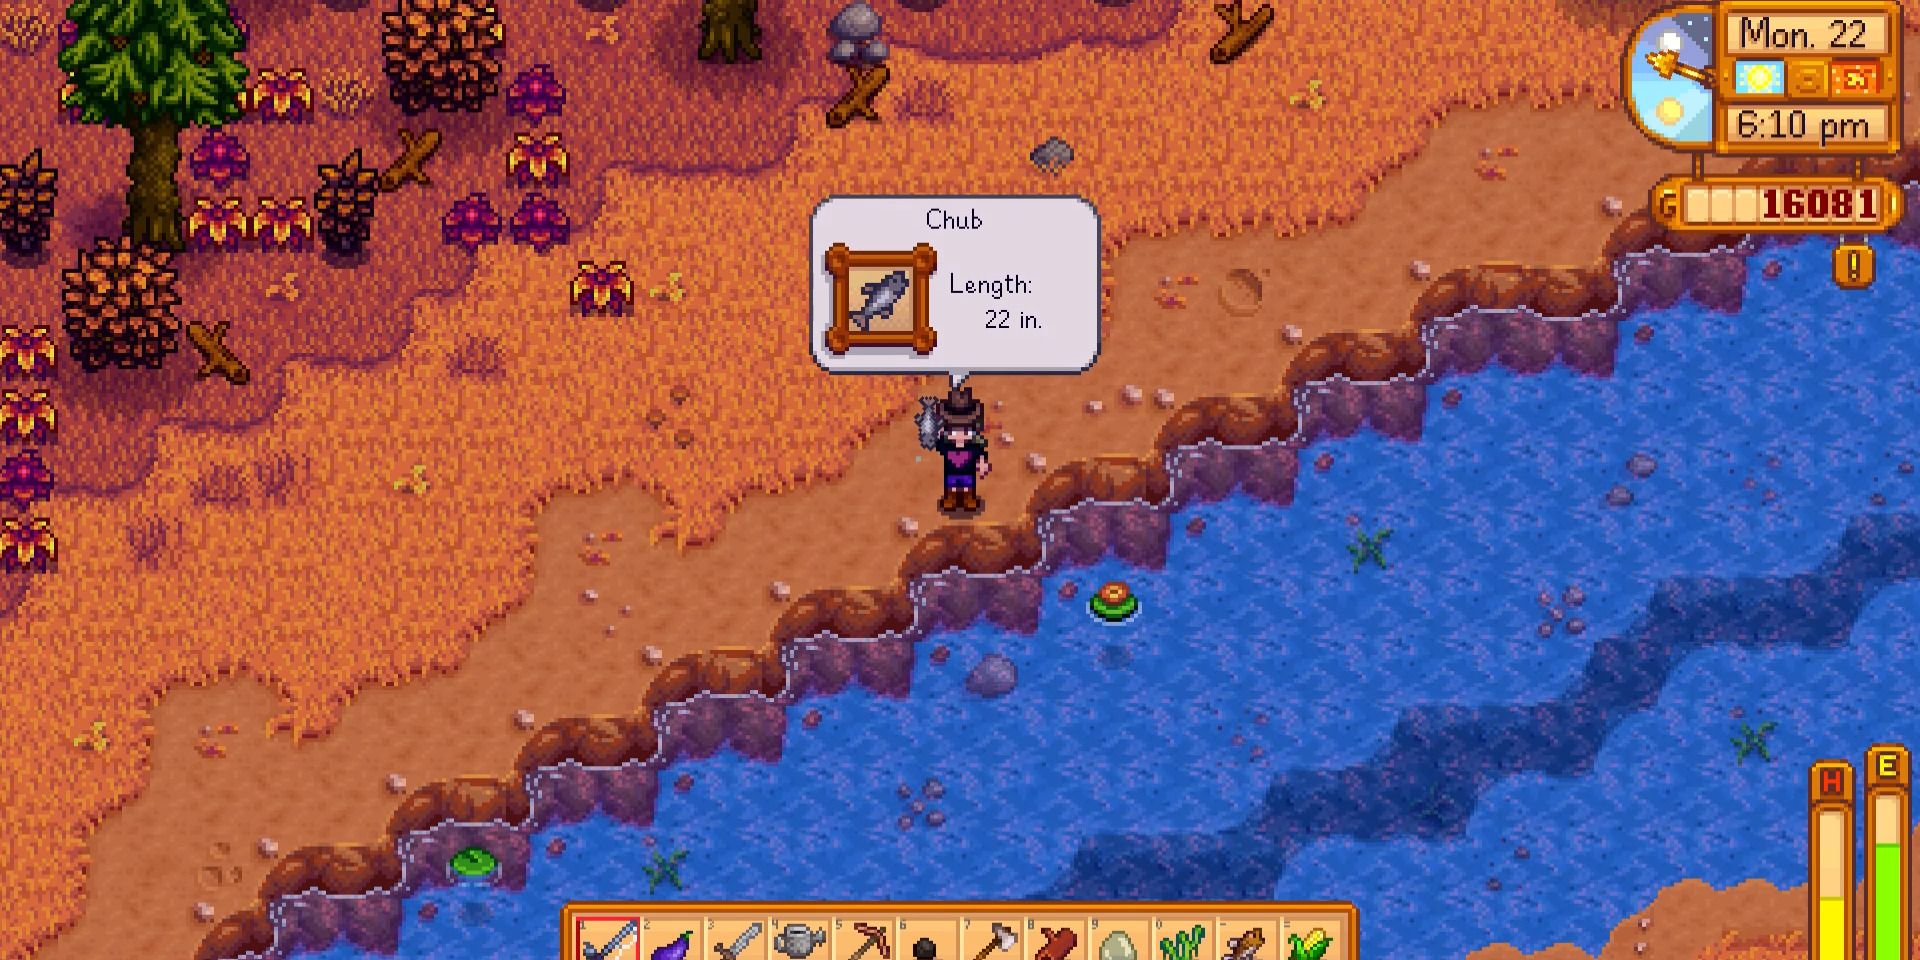 Image of a character after catching a Chub in the Cindersap Forest River in Stardew Valley